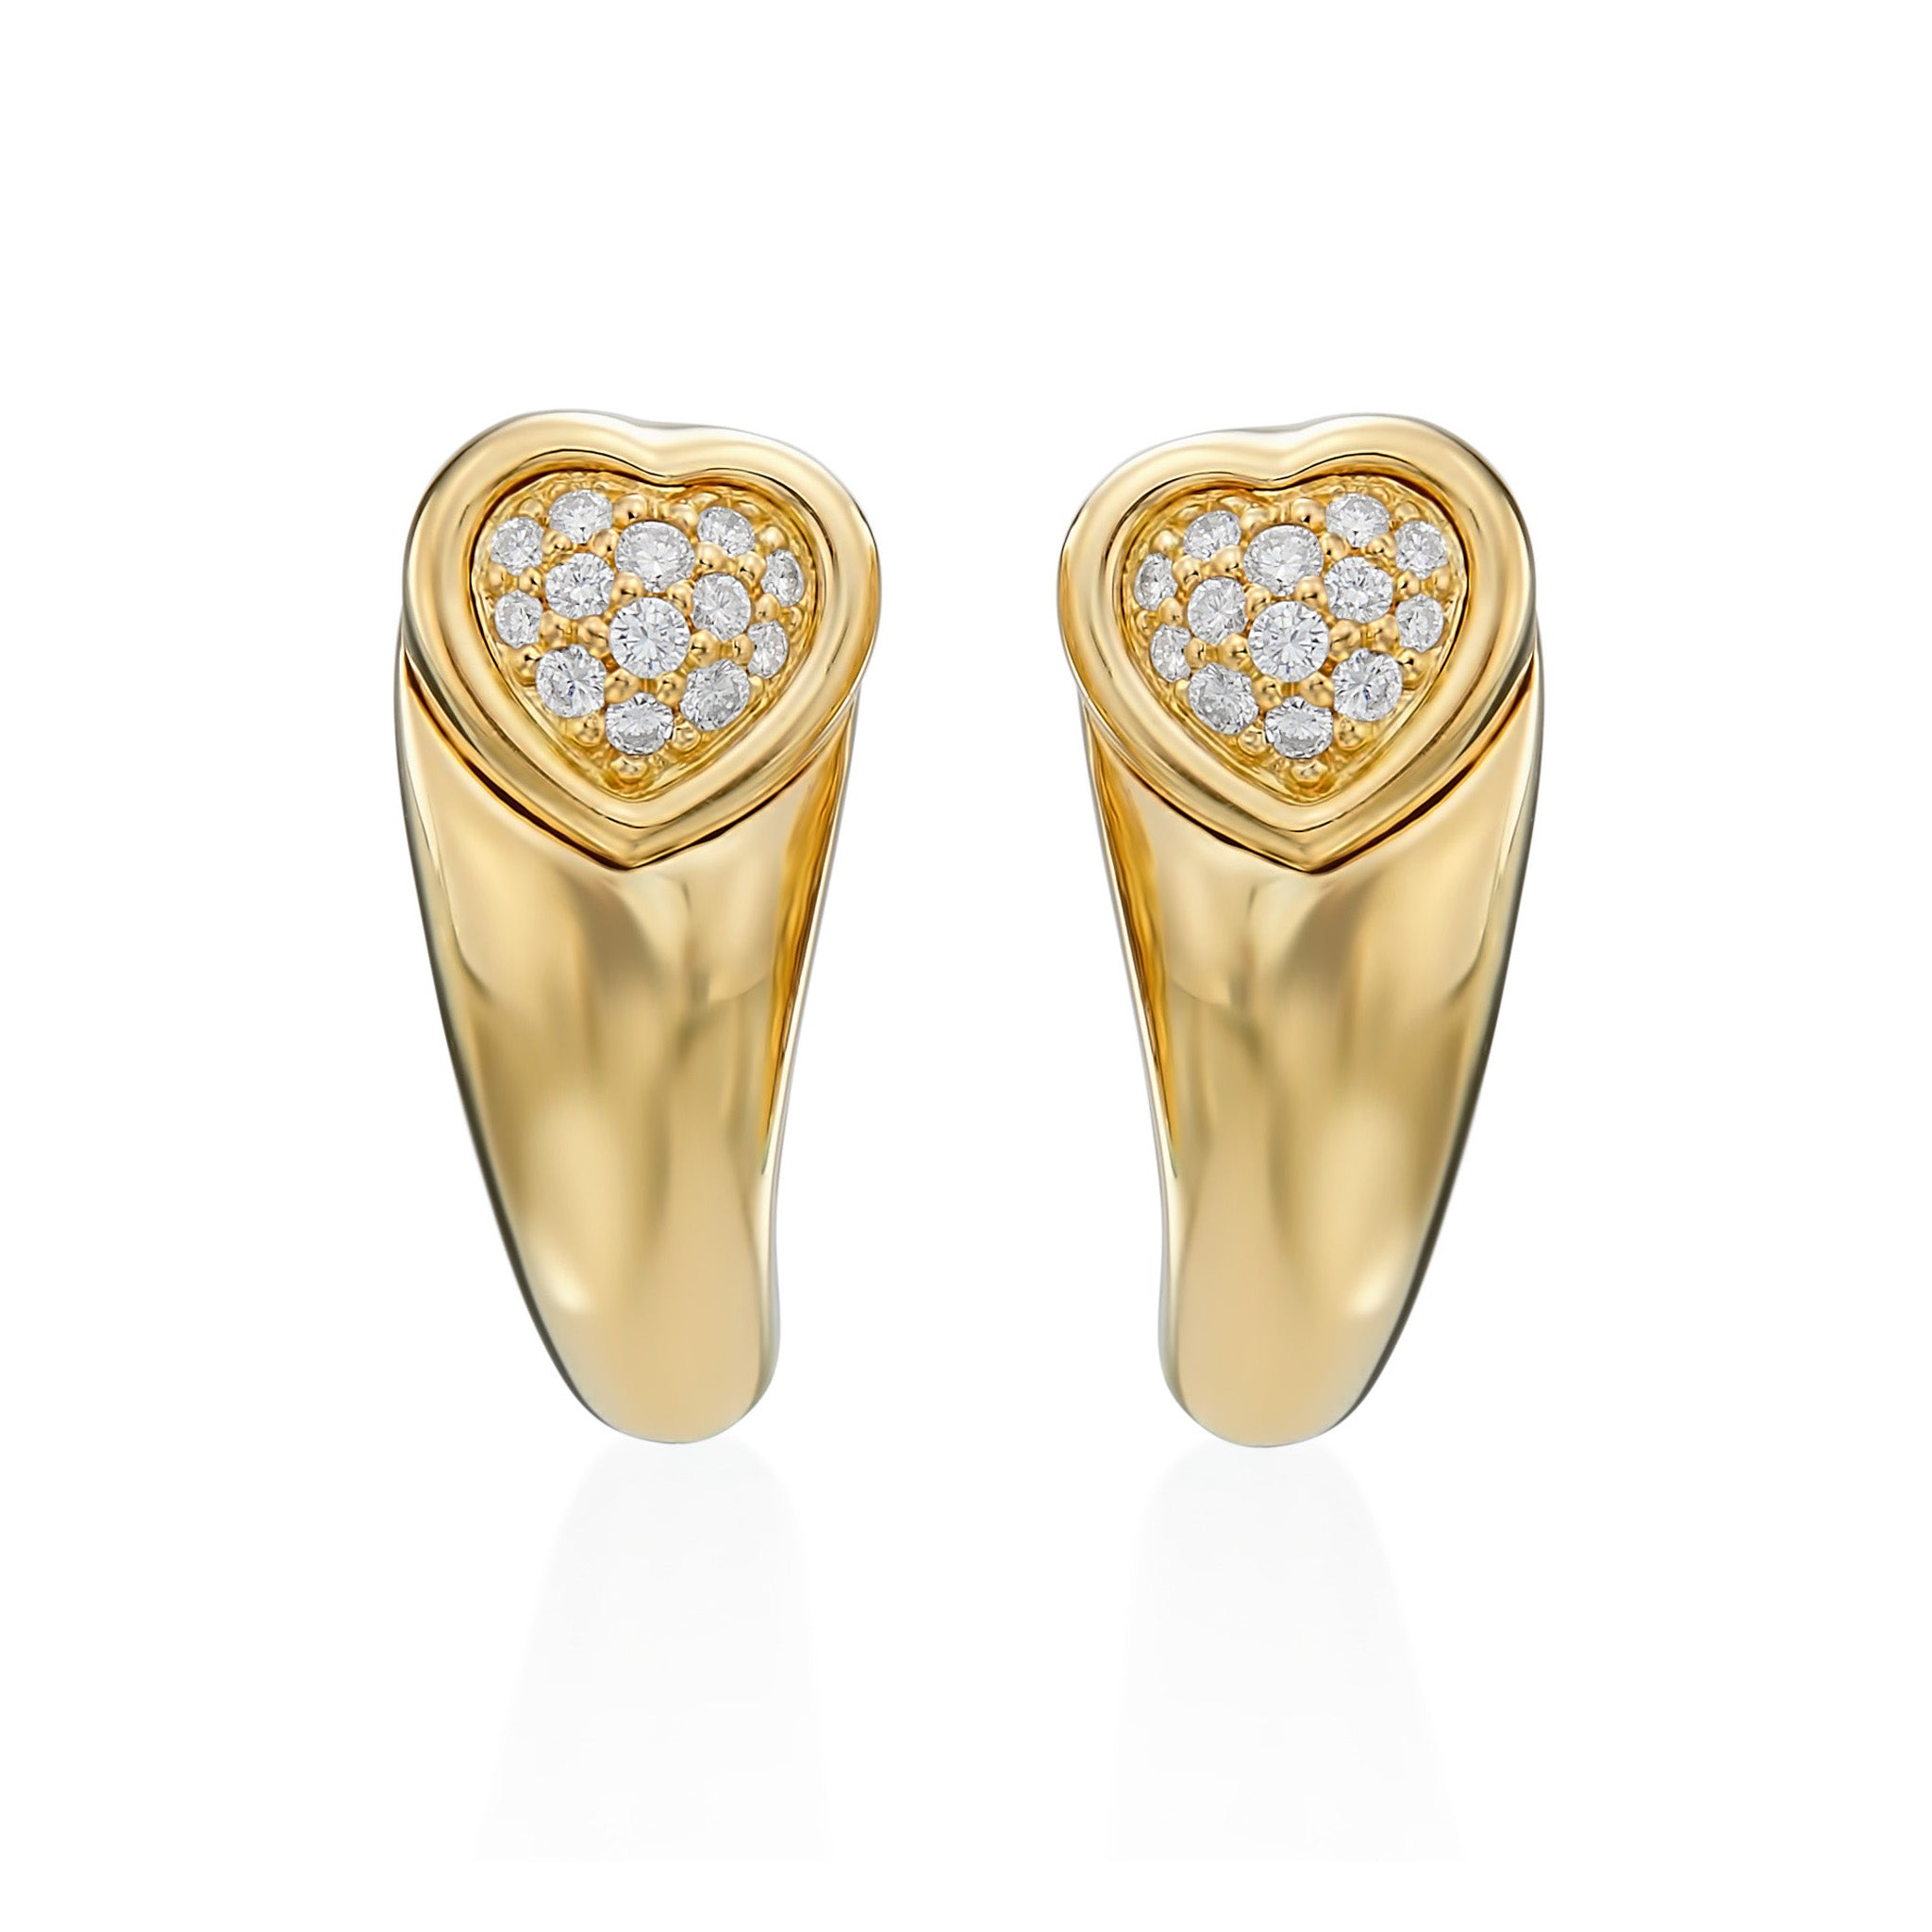 Piaget Diamond and 18k Gold Heart Earclips